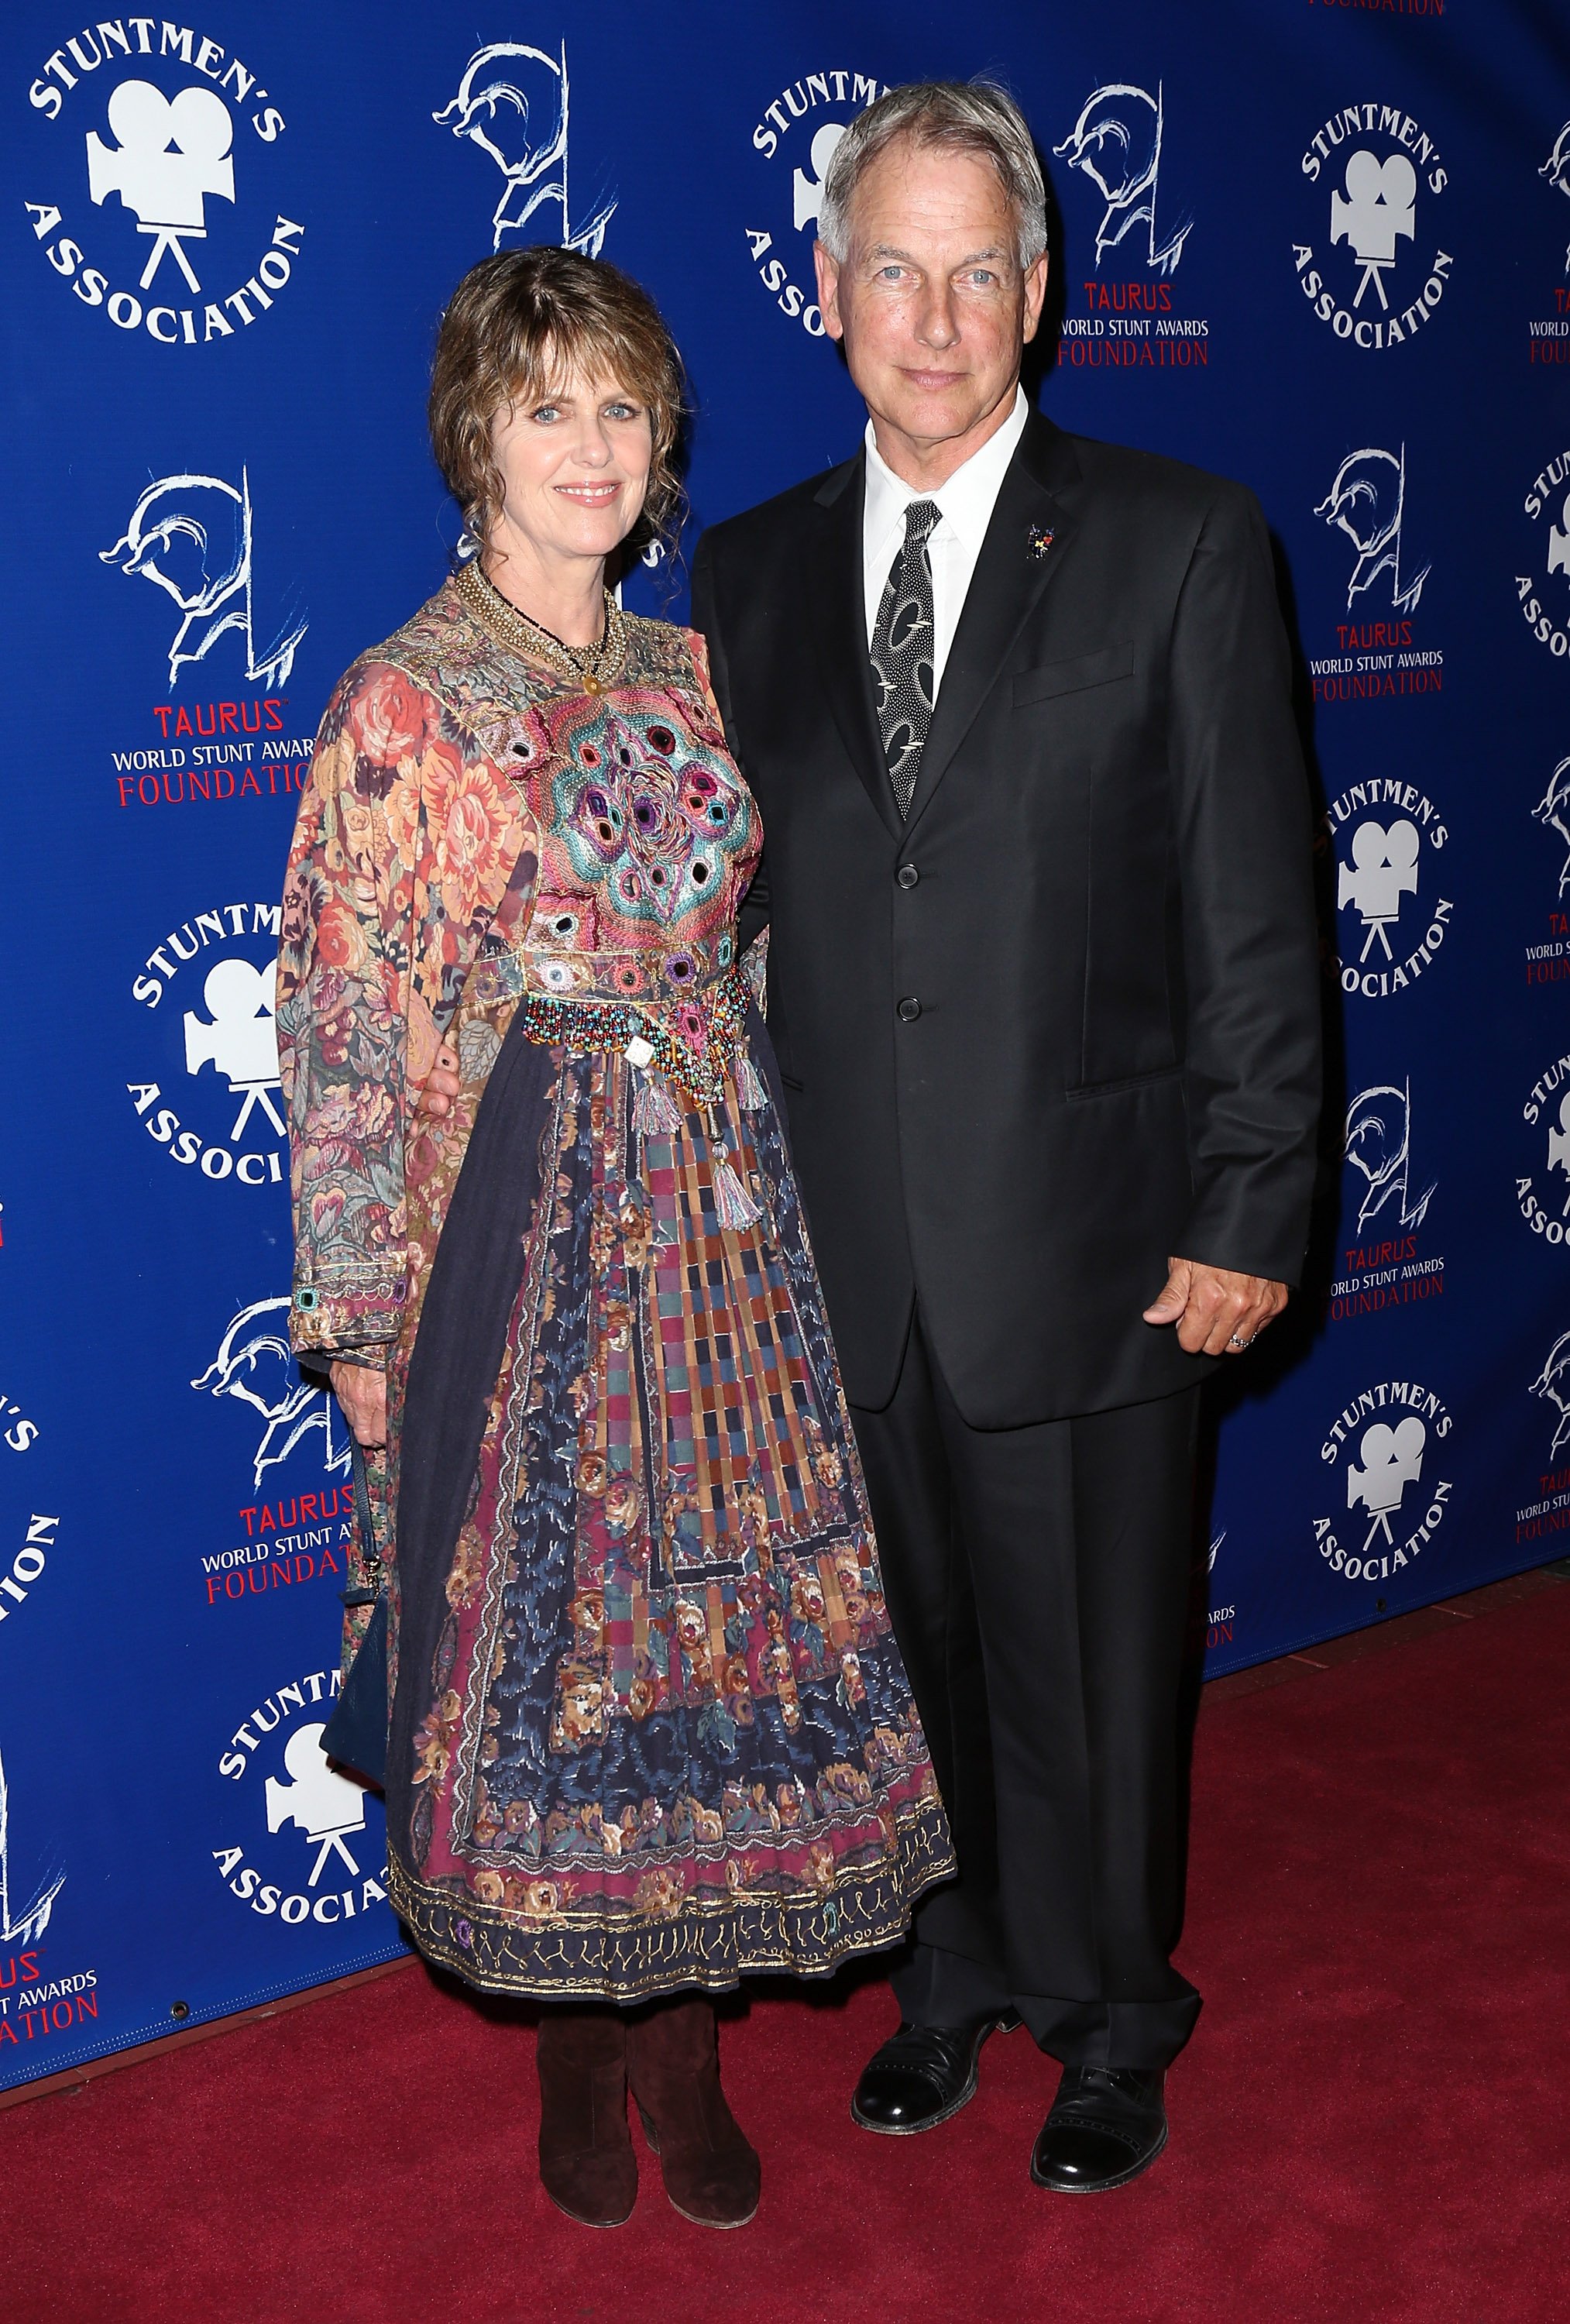 Pam Dawber and husband Mark Harmon at the Stuntmen's Association of Motion Pictures 52nd Annual Awards Dinnerheld at the Hilton Universal City on September 14, 2013 in Universal City, California. | Source: Getty Images